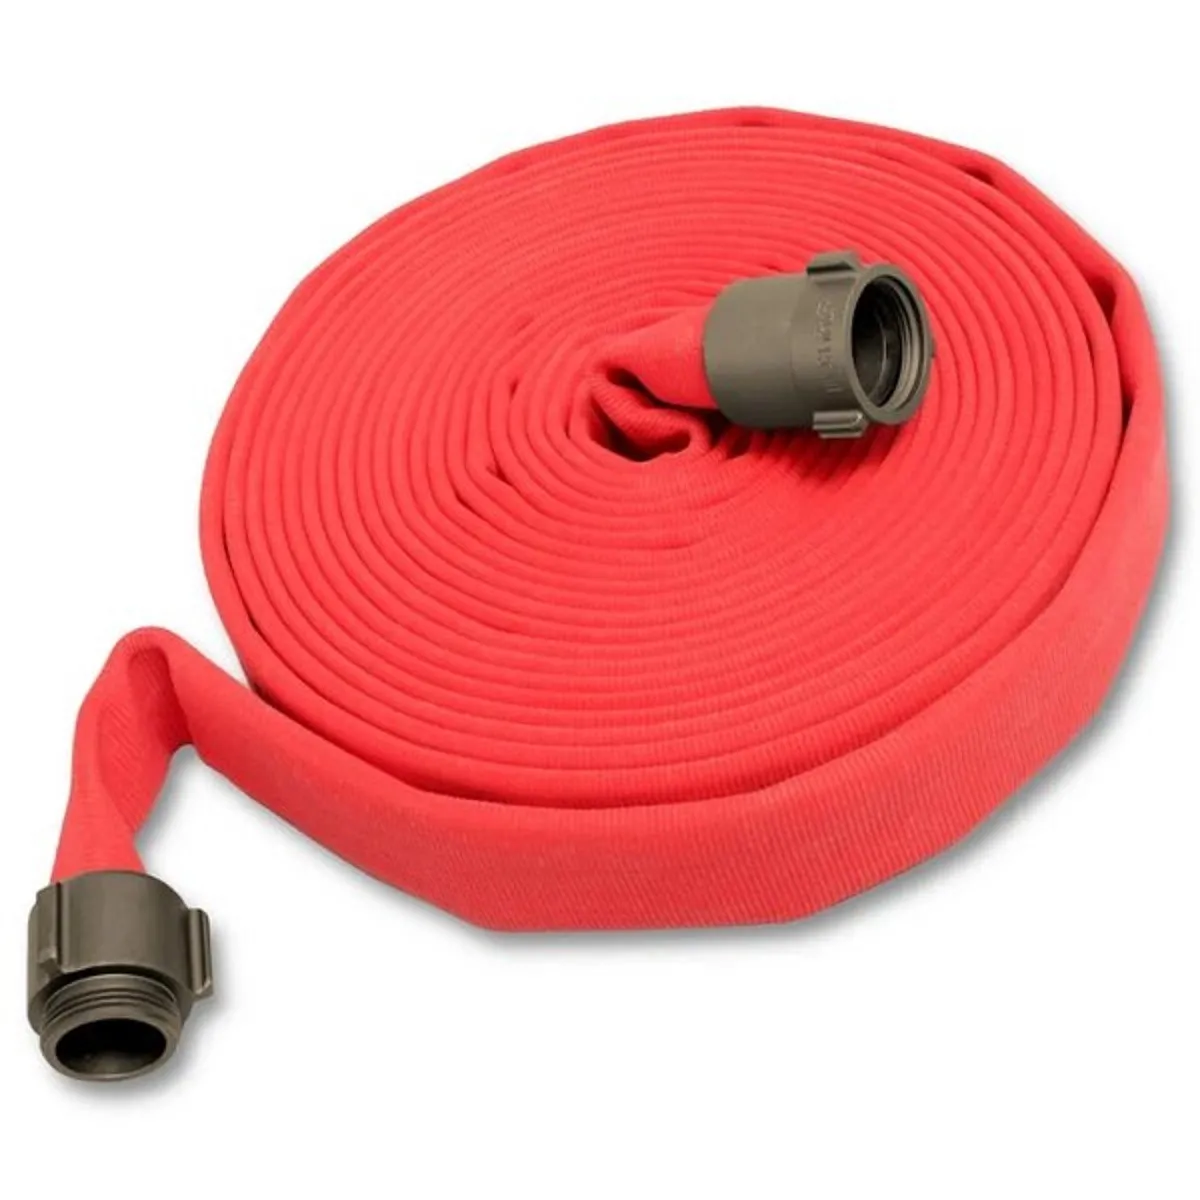 CHIEF FIRE Fire Hose Double Jacket, Red, 2.5 x 50 ft. - 25D8-50FT-RED